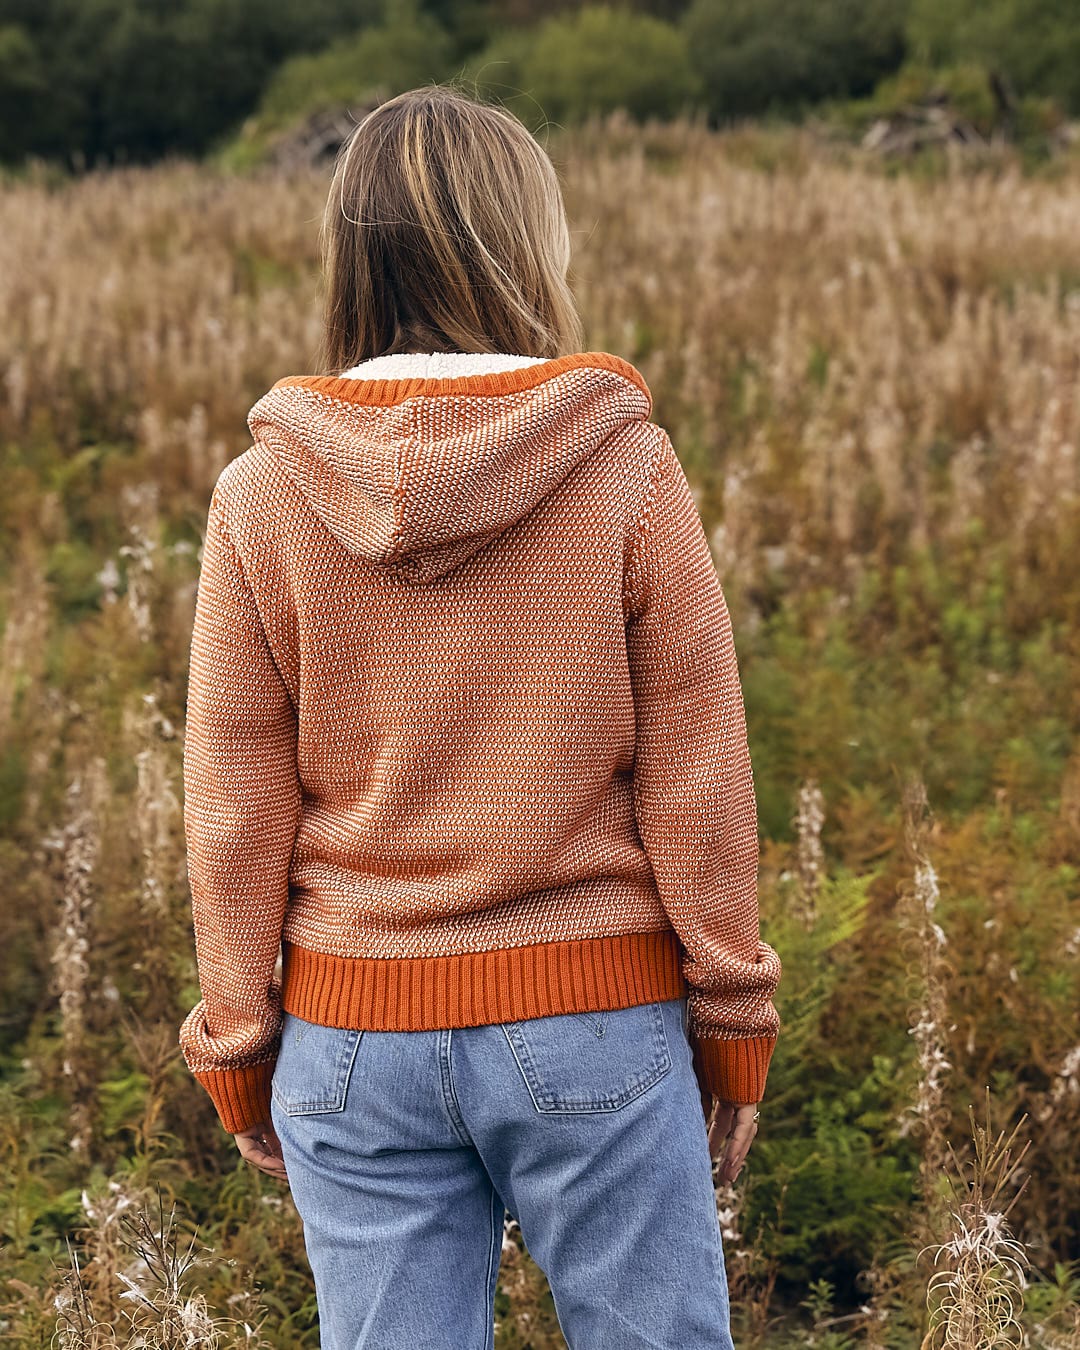 A woman standing in a field wearing a Saltrock - Helly Womens Borg Lined Knitted Hoodie - Orange sweater and jeans.